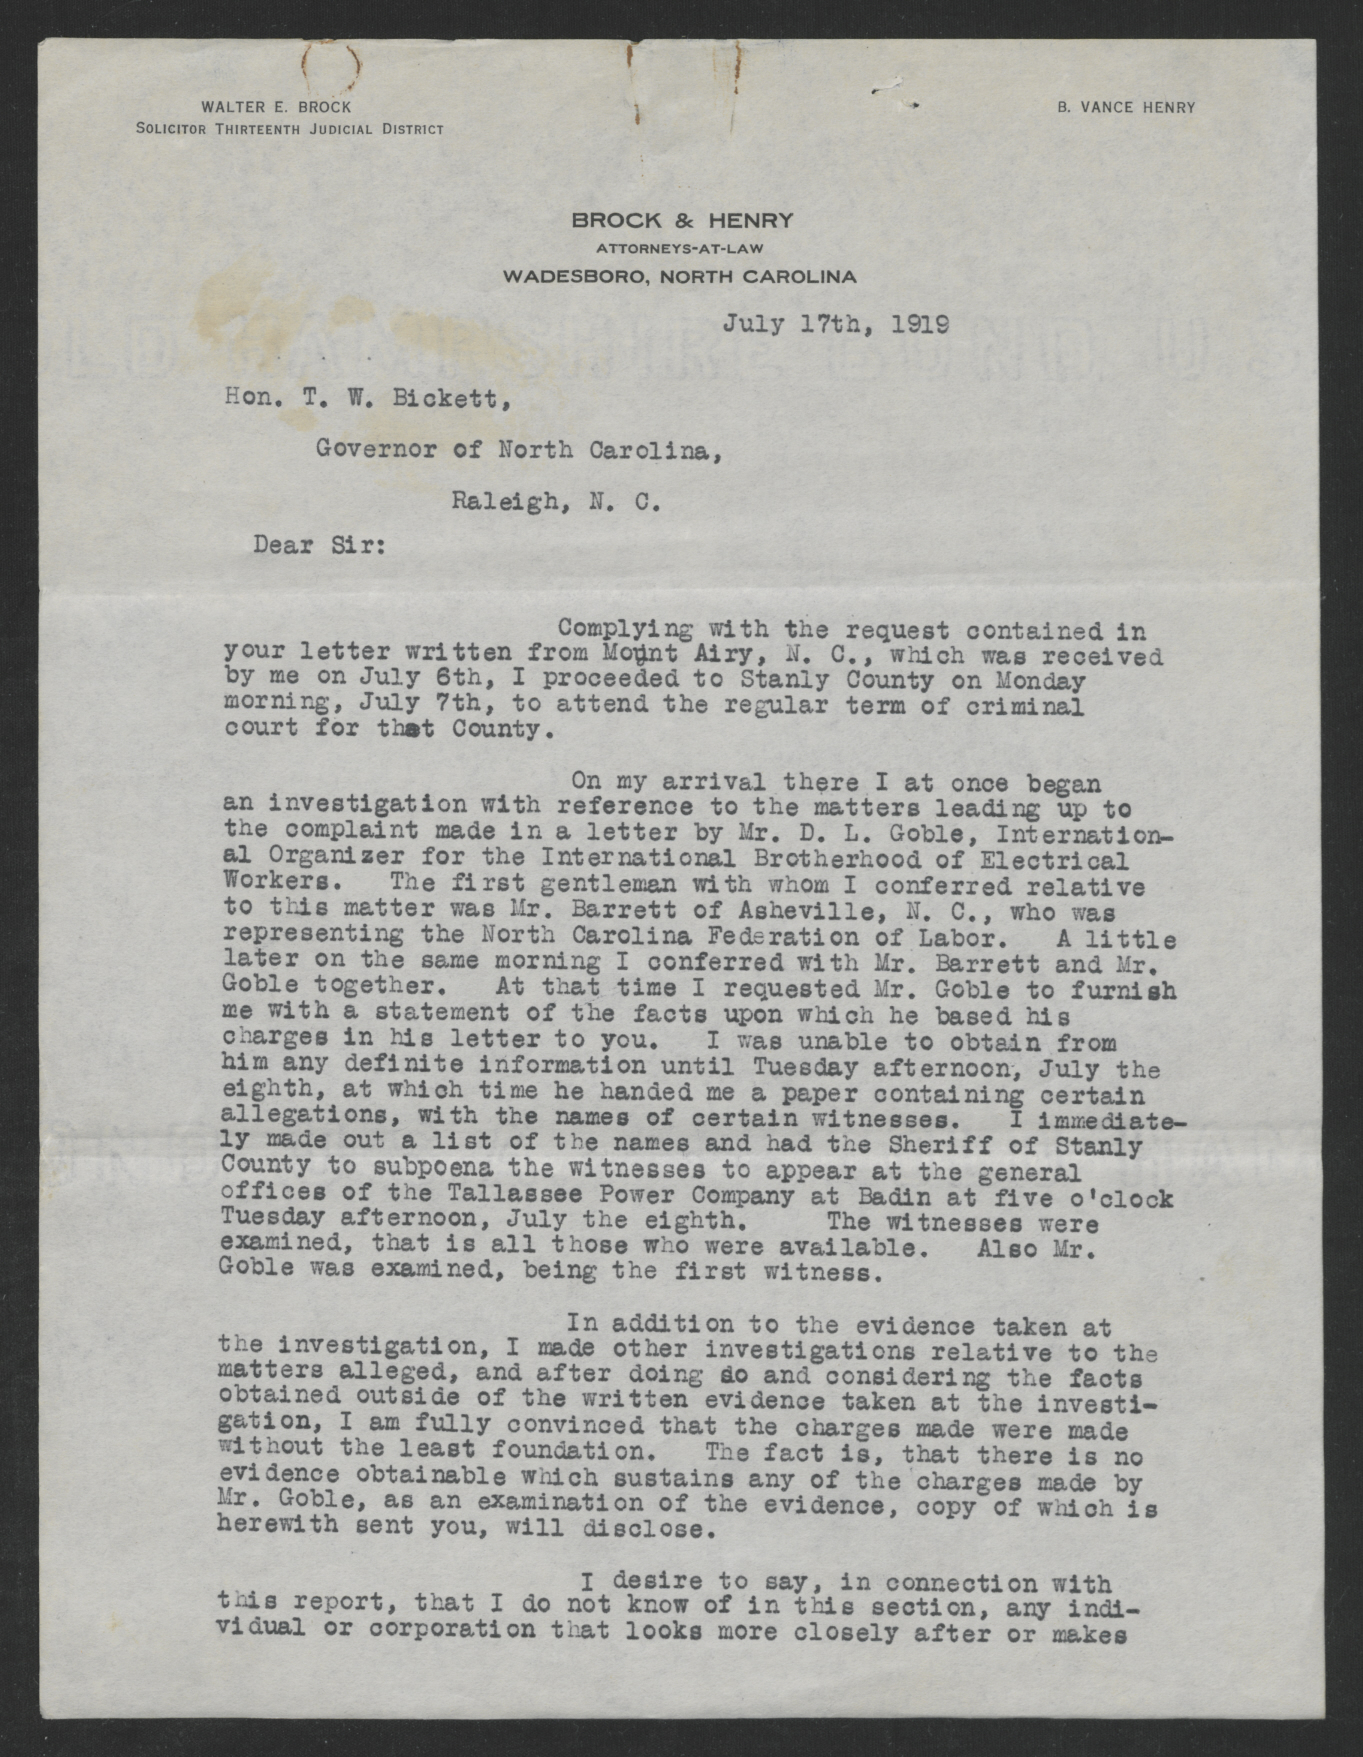 Letter from Walter E. Brock to Thomas W. Bickett, July 17, 1919, page 1